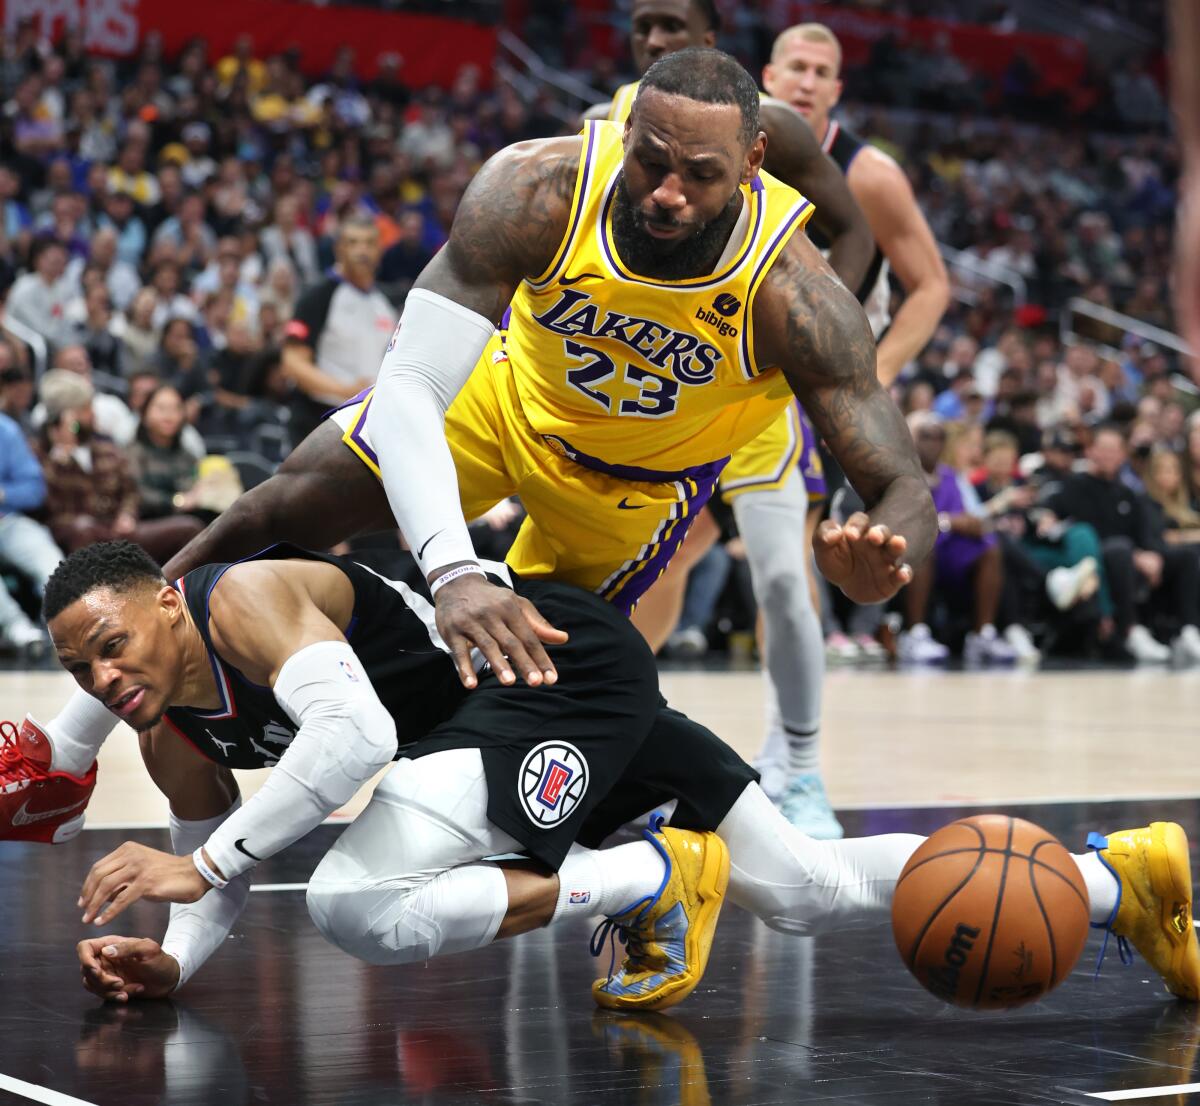 LeBron James and Russell Westbrook go for a loose ball in the fourth quarter.